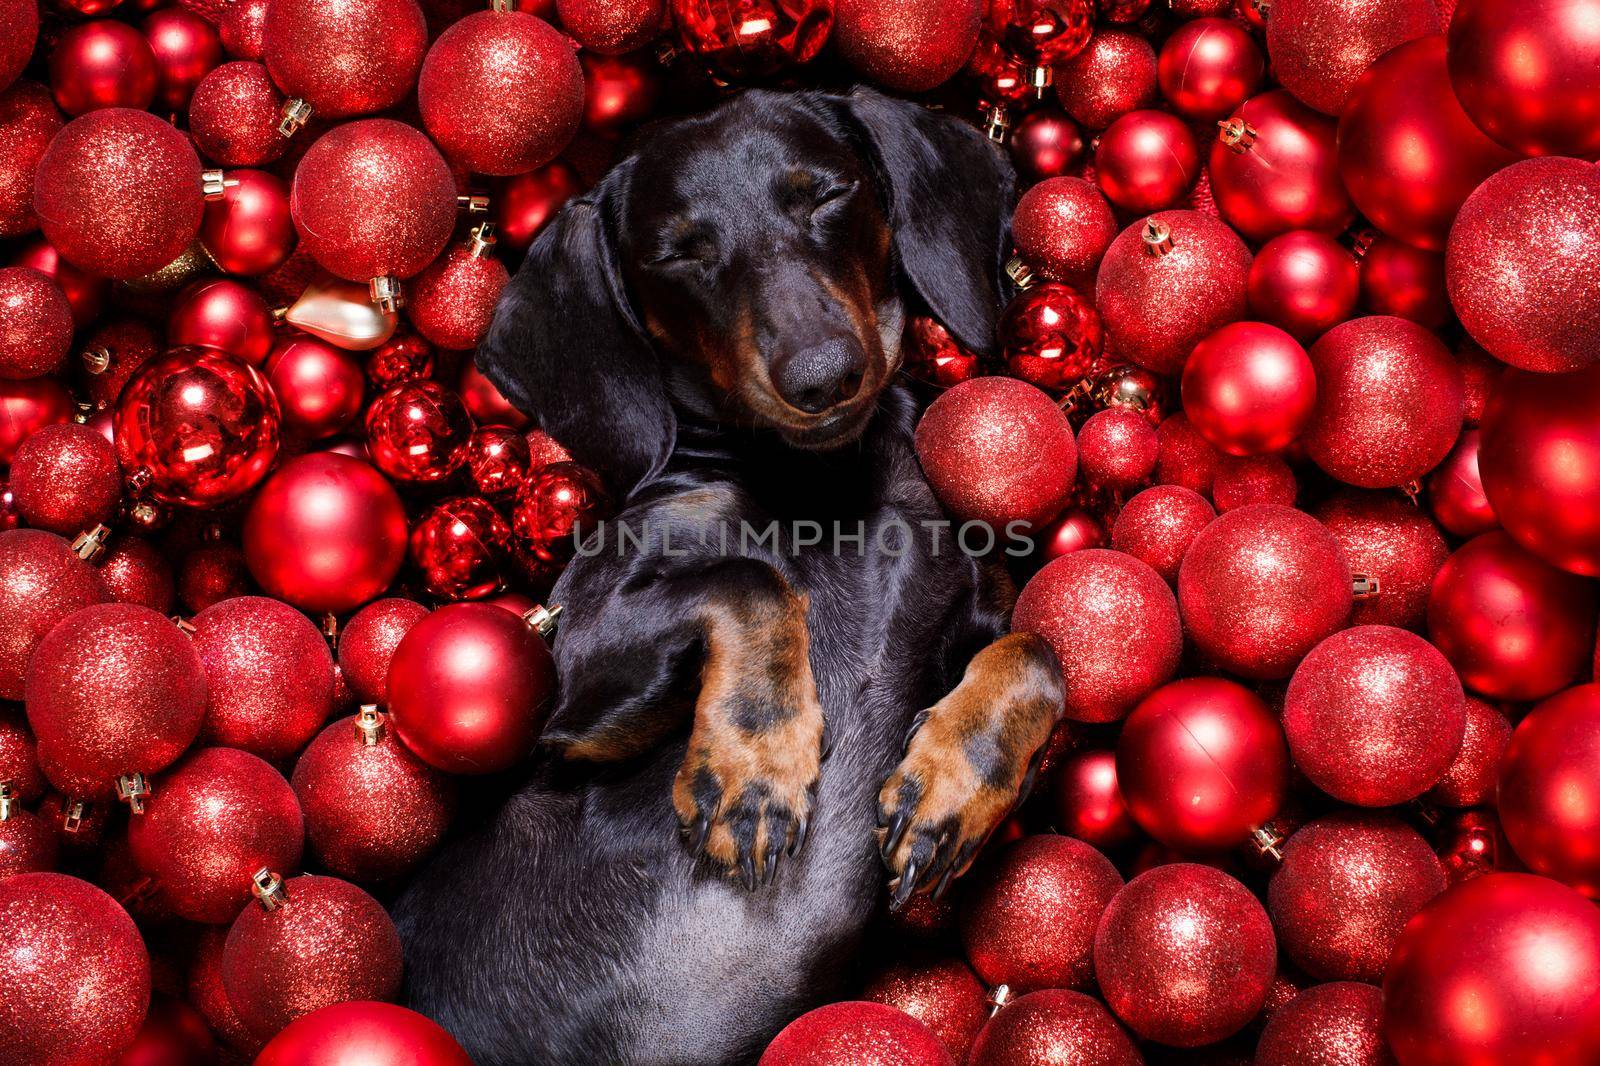 dachsund sausage dog  as santa claus  for christmas holidays resting on a xmas balls baubles as background